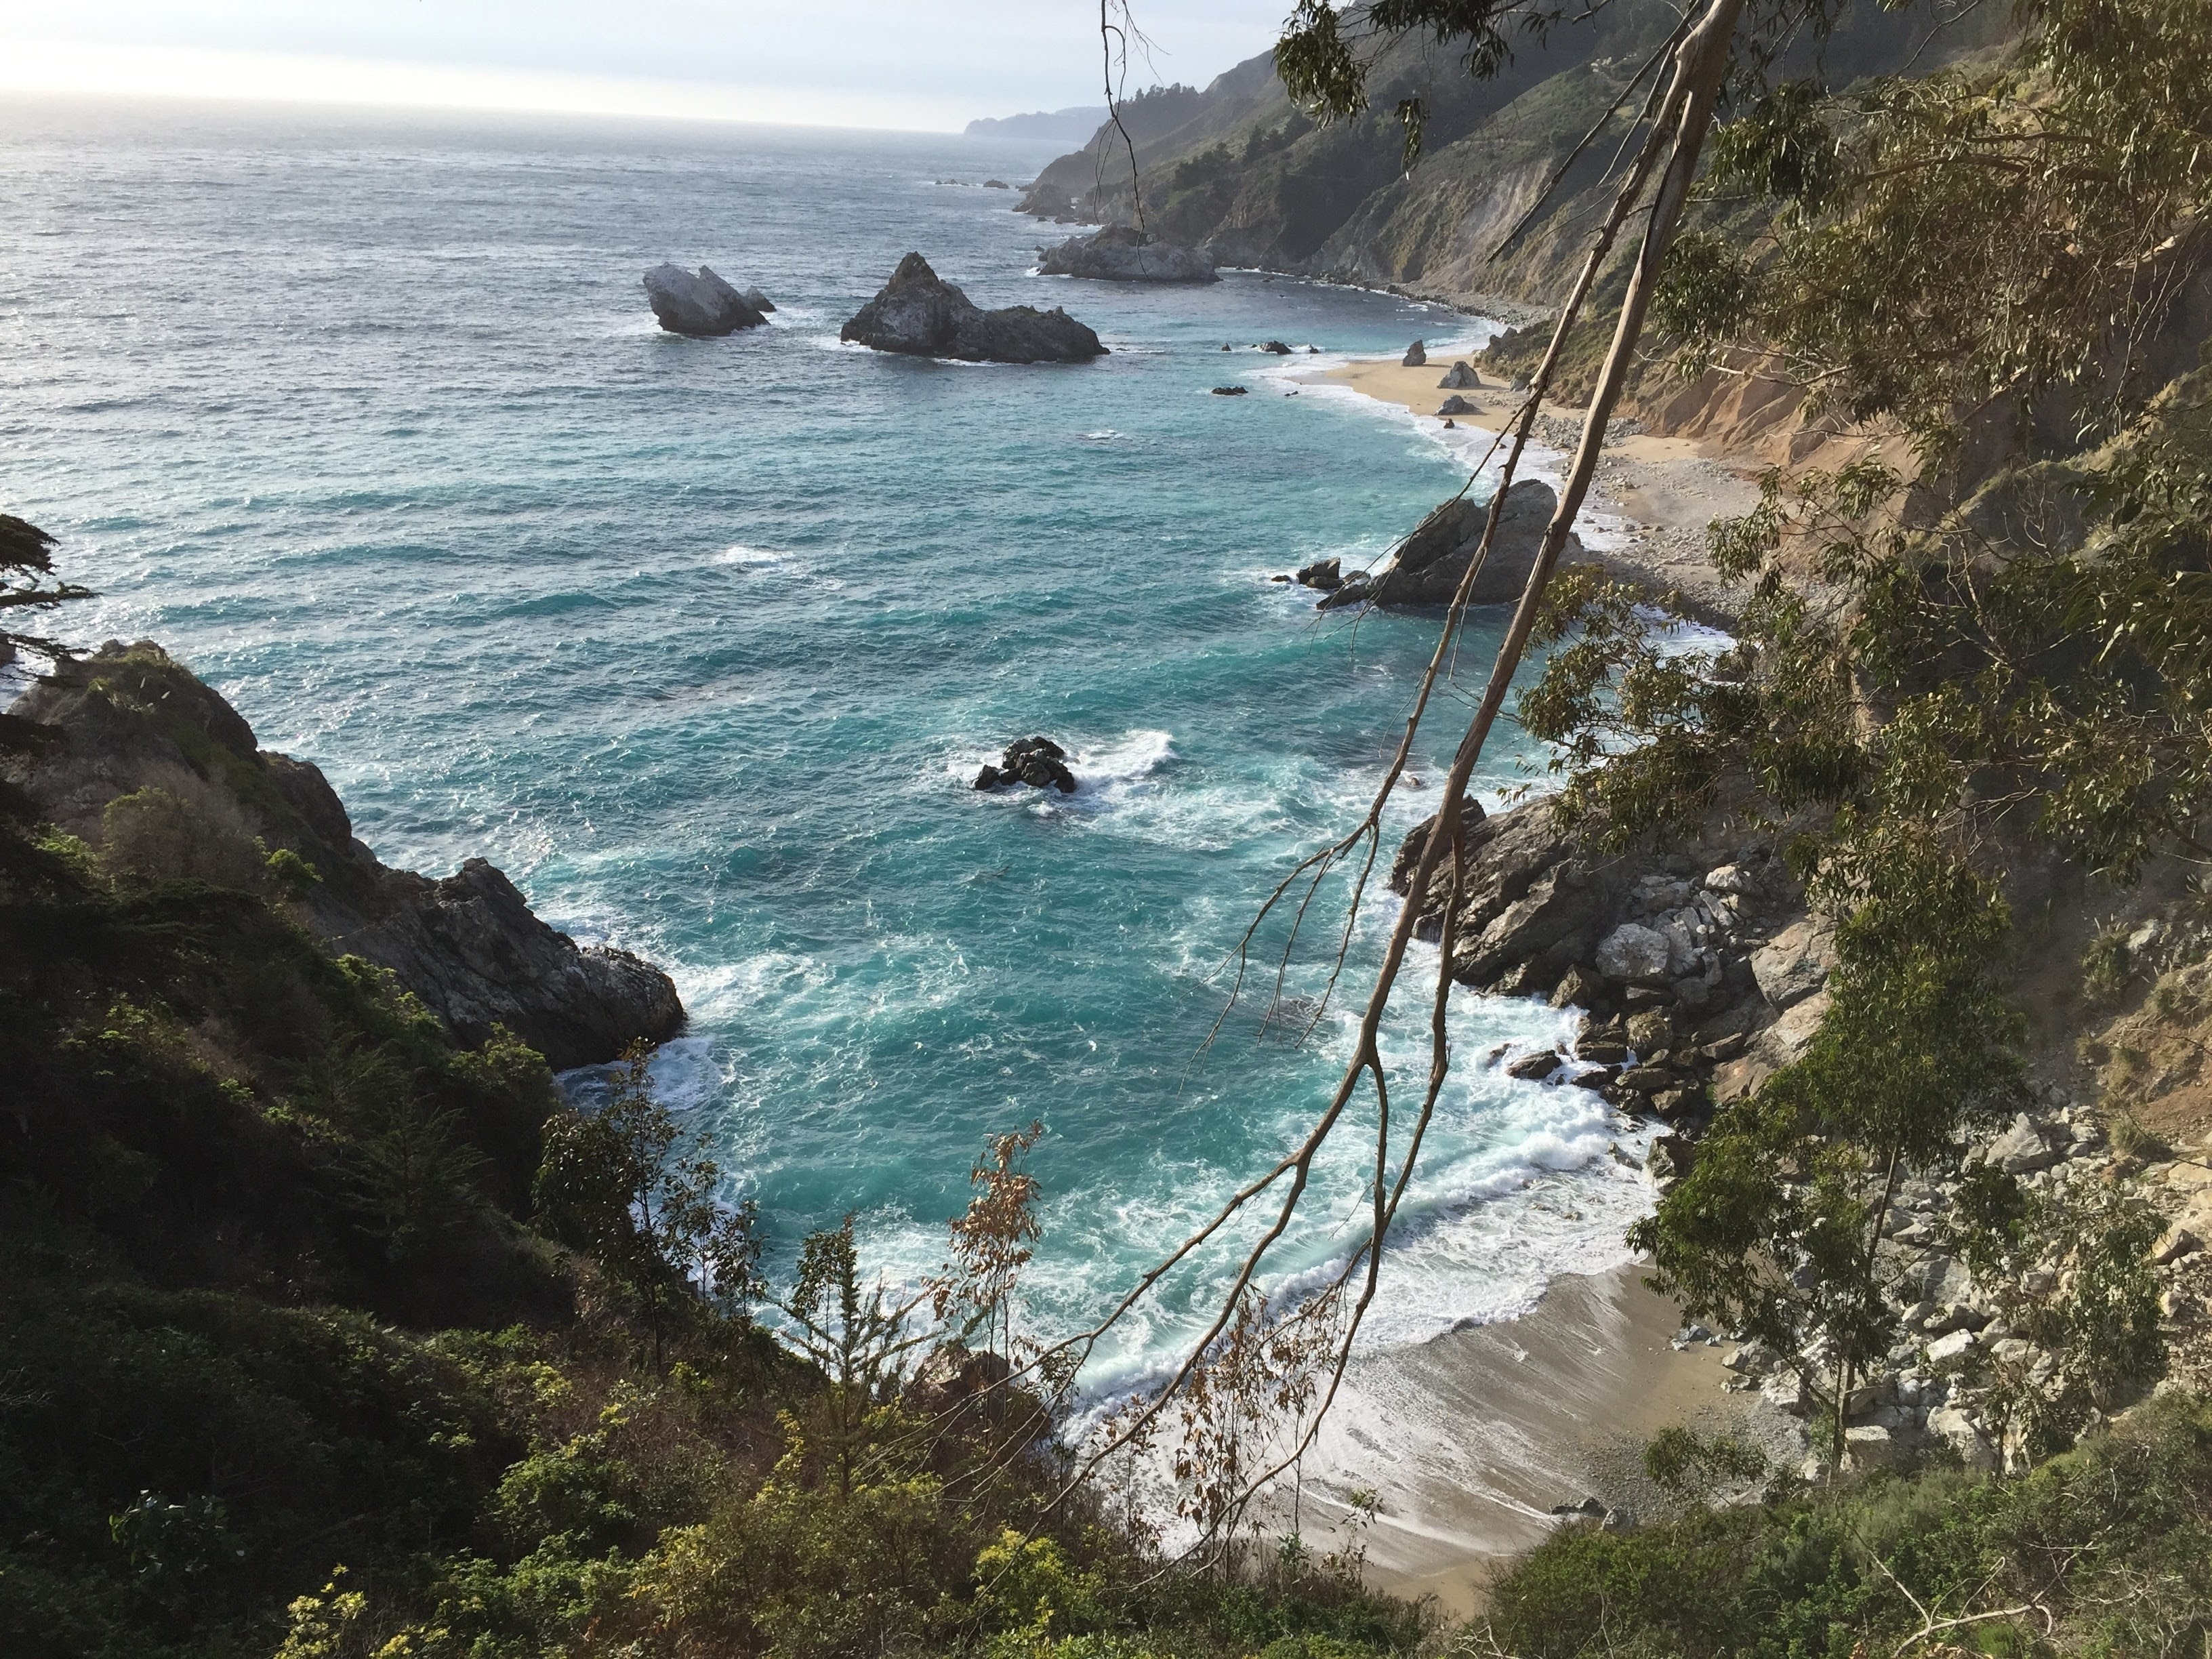 McWay Beach in Big Sur is a picturesque beach in a small cove. A waterfall of the same name is the big attraction here, although it can't be seen in this picture. #LifeAtExpedia